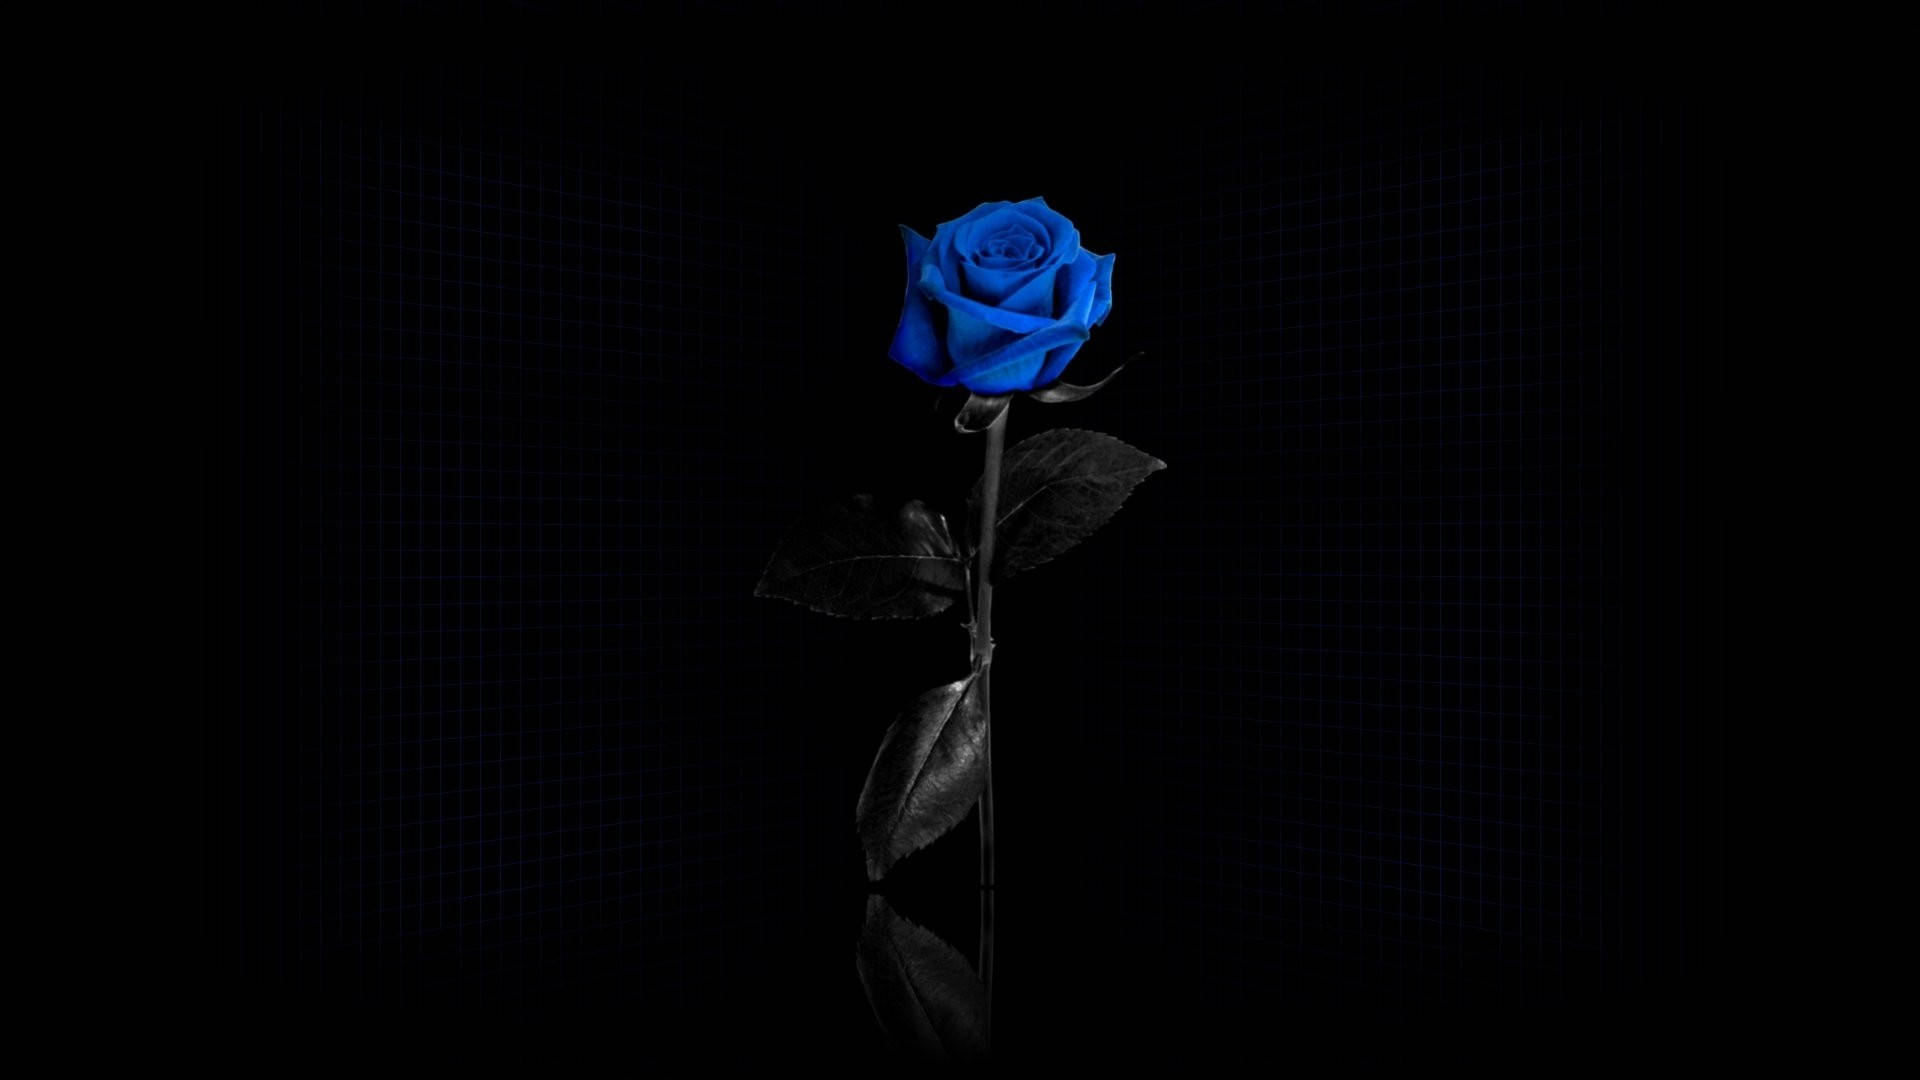 Rose With Beautiful Blue Petals Background